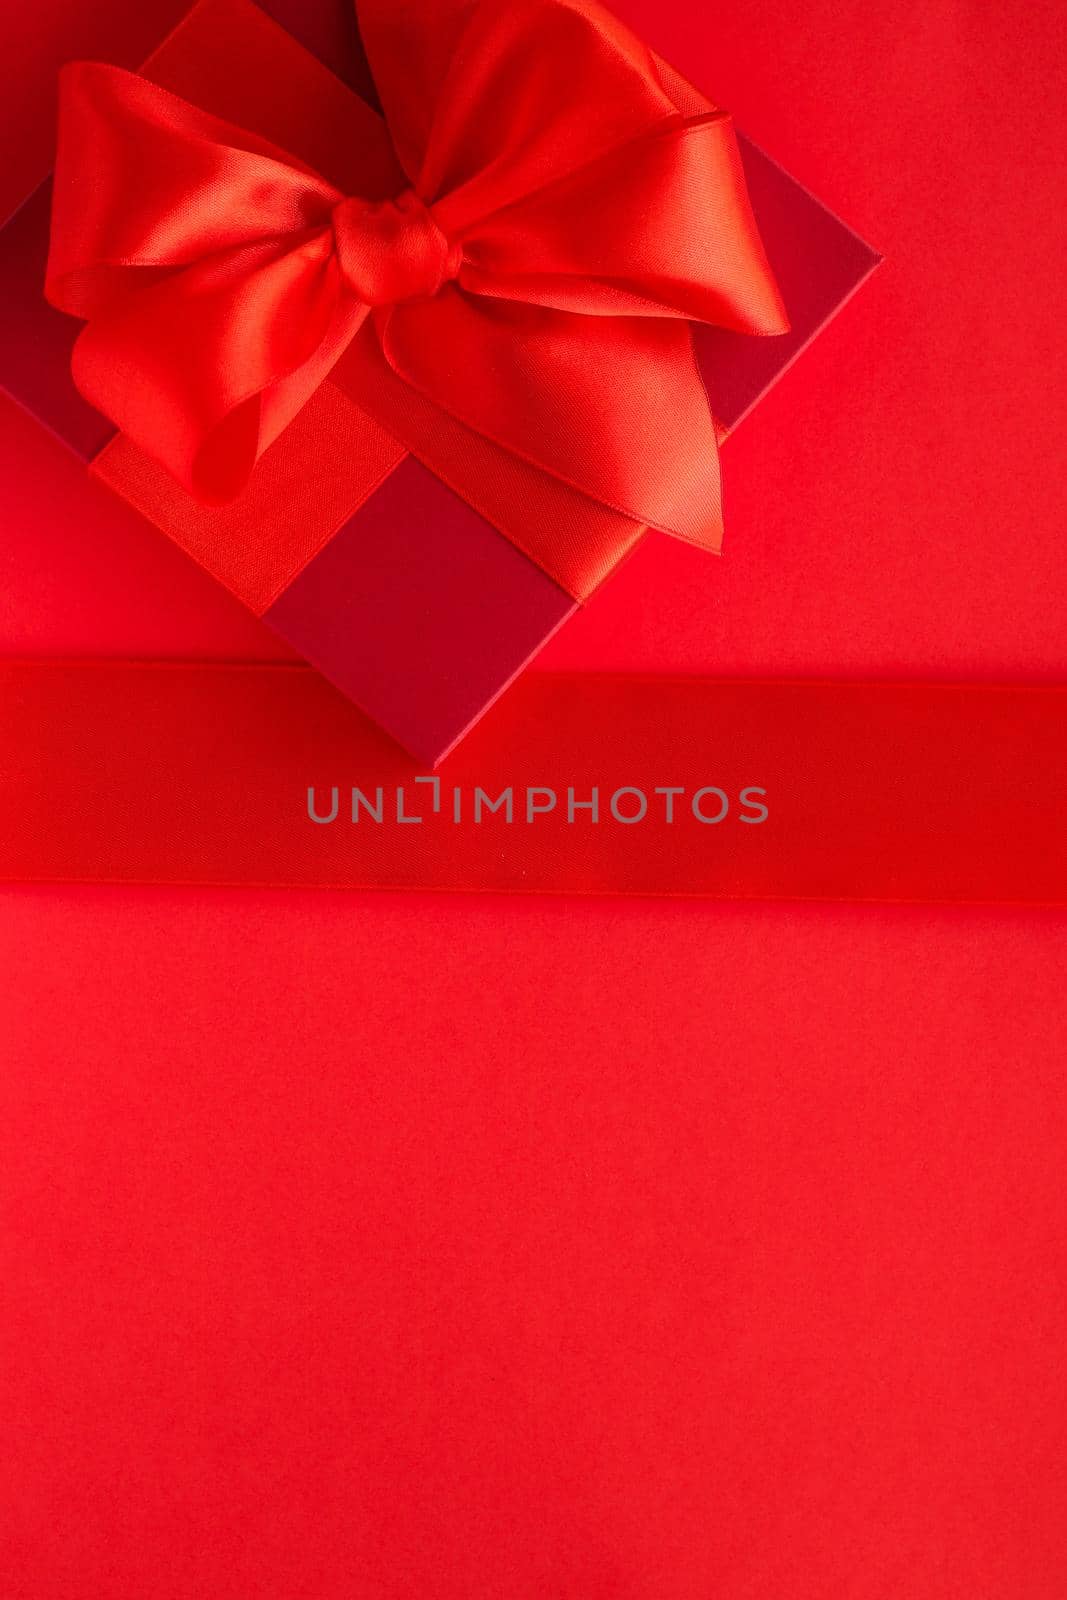 Romantic celebration, lifestyle and birthday present concept - Luxury holiday gifts on red